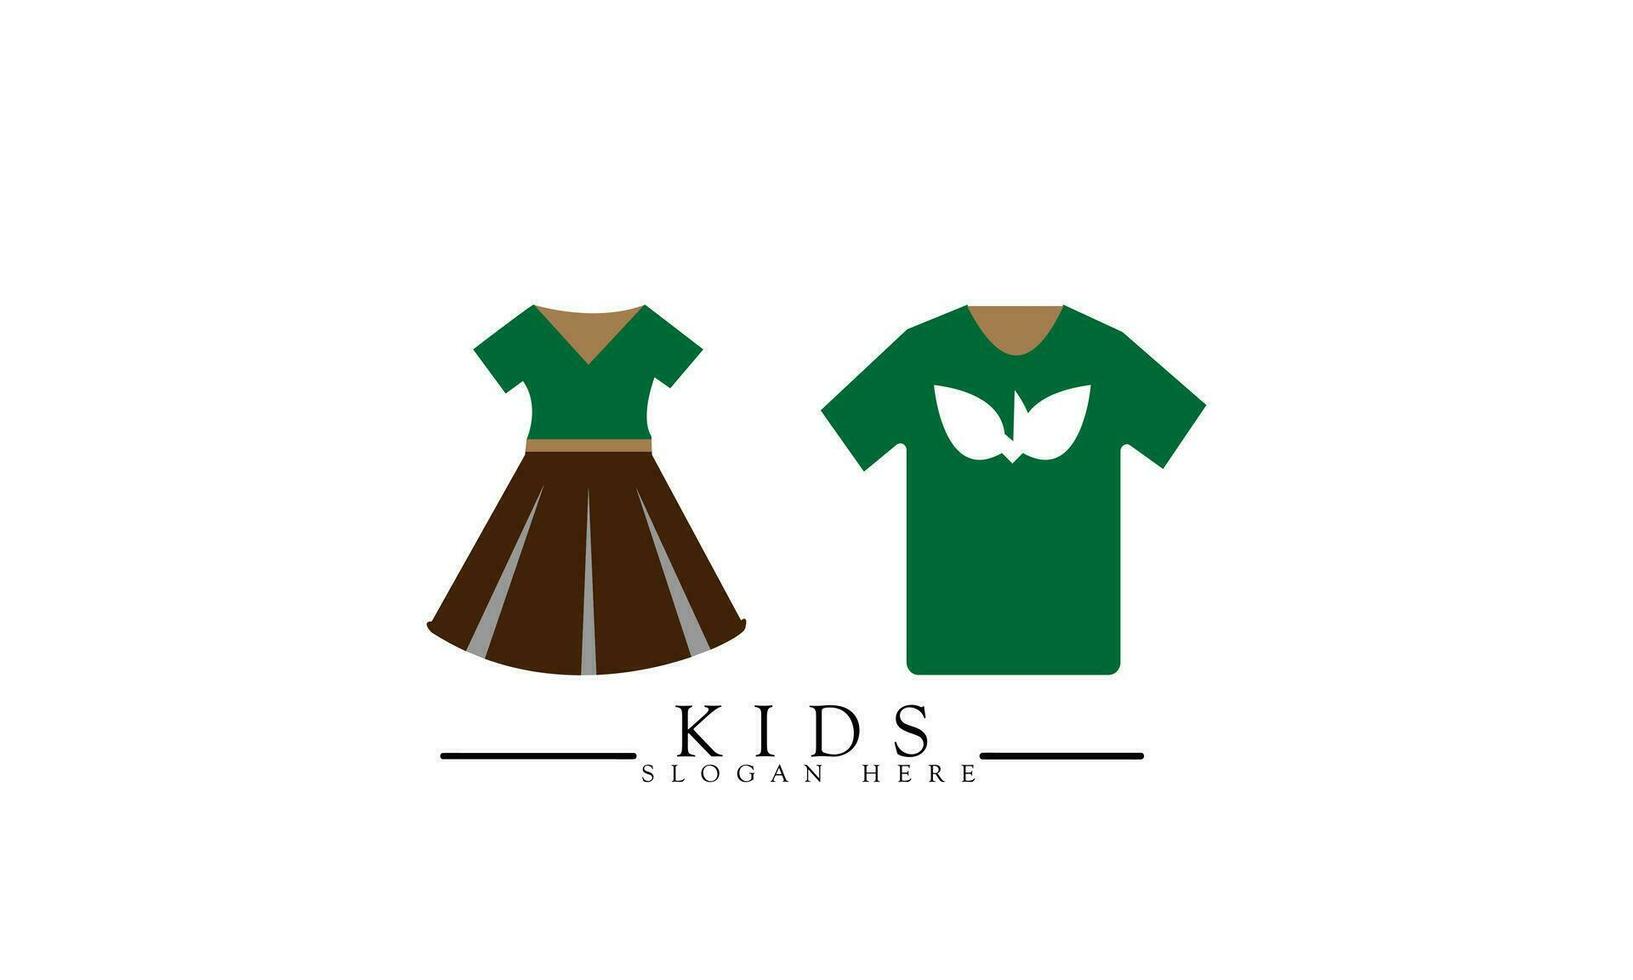 couple clothes for boys and girls, for relaxing, vector illustration of a children's clothing shop